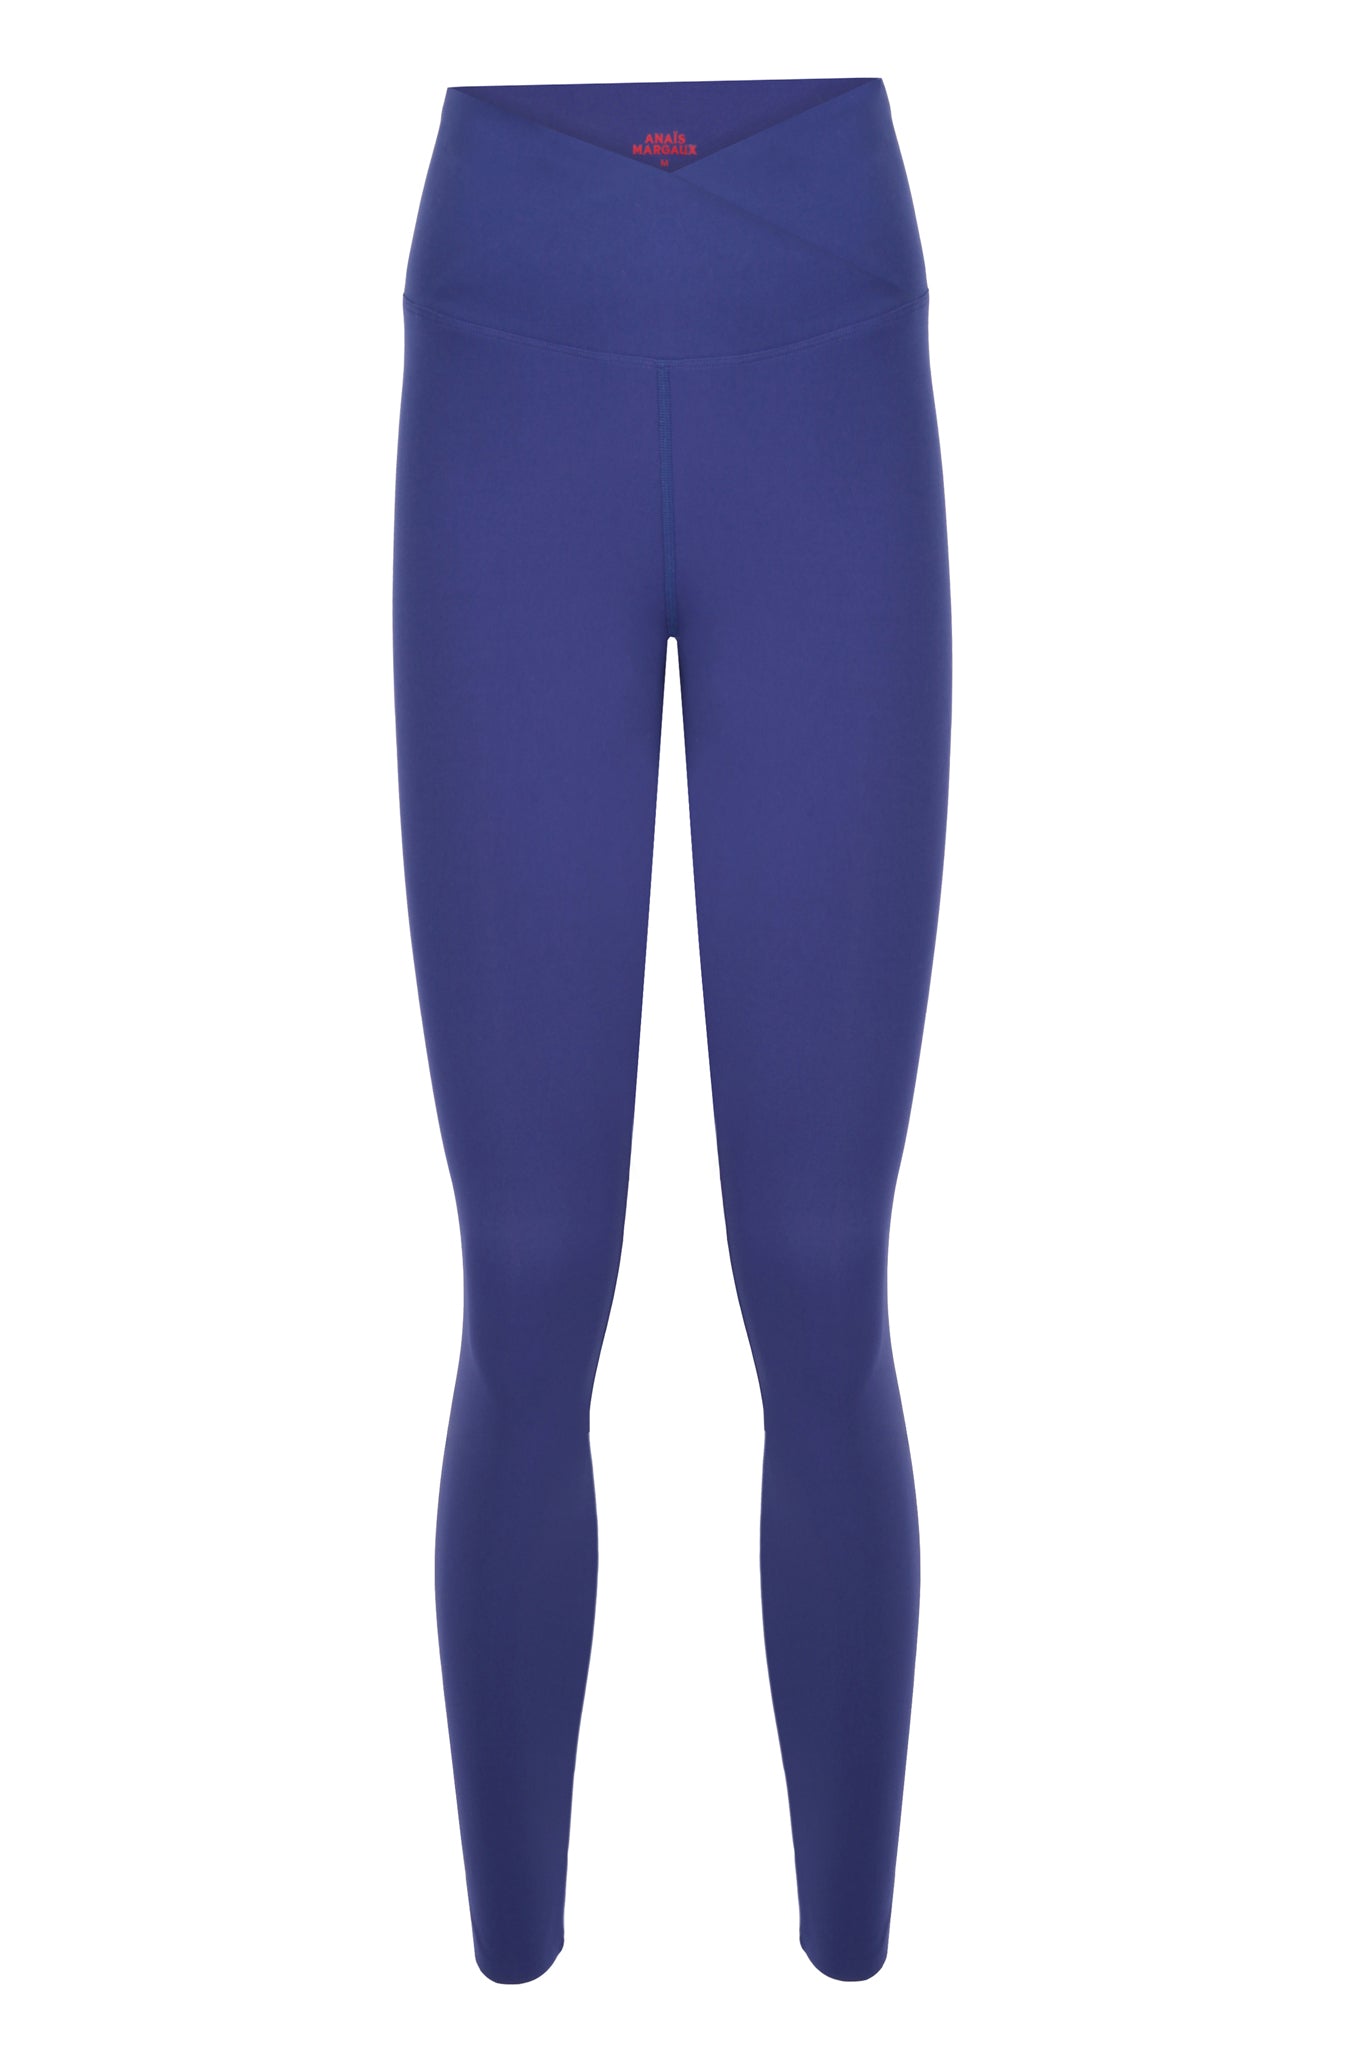 Gap Fit Leggings XL Blue Marble Power Full-Length Legging Super High Rise  NWT - $10 New With Tags - From SaiLieSie